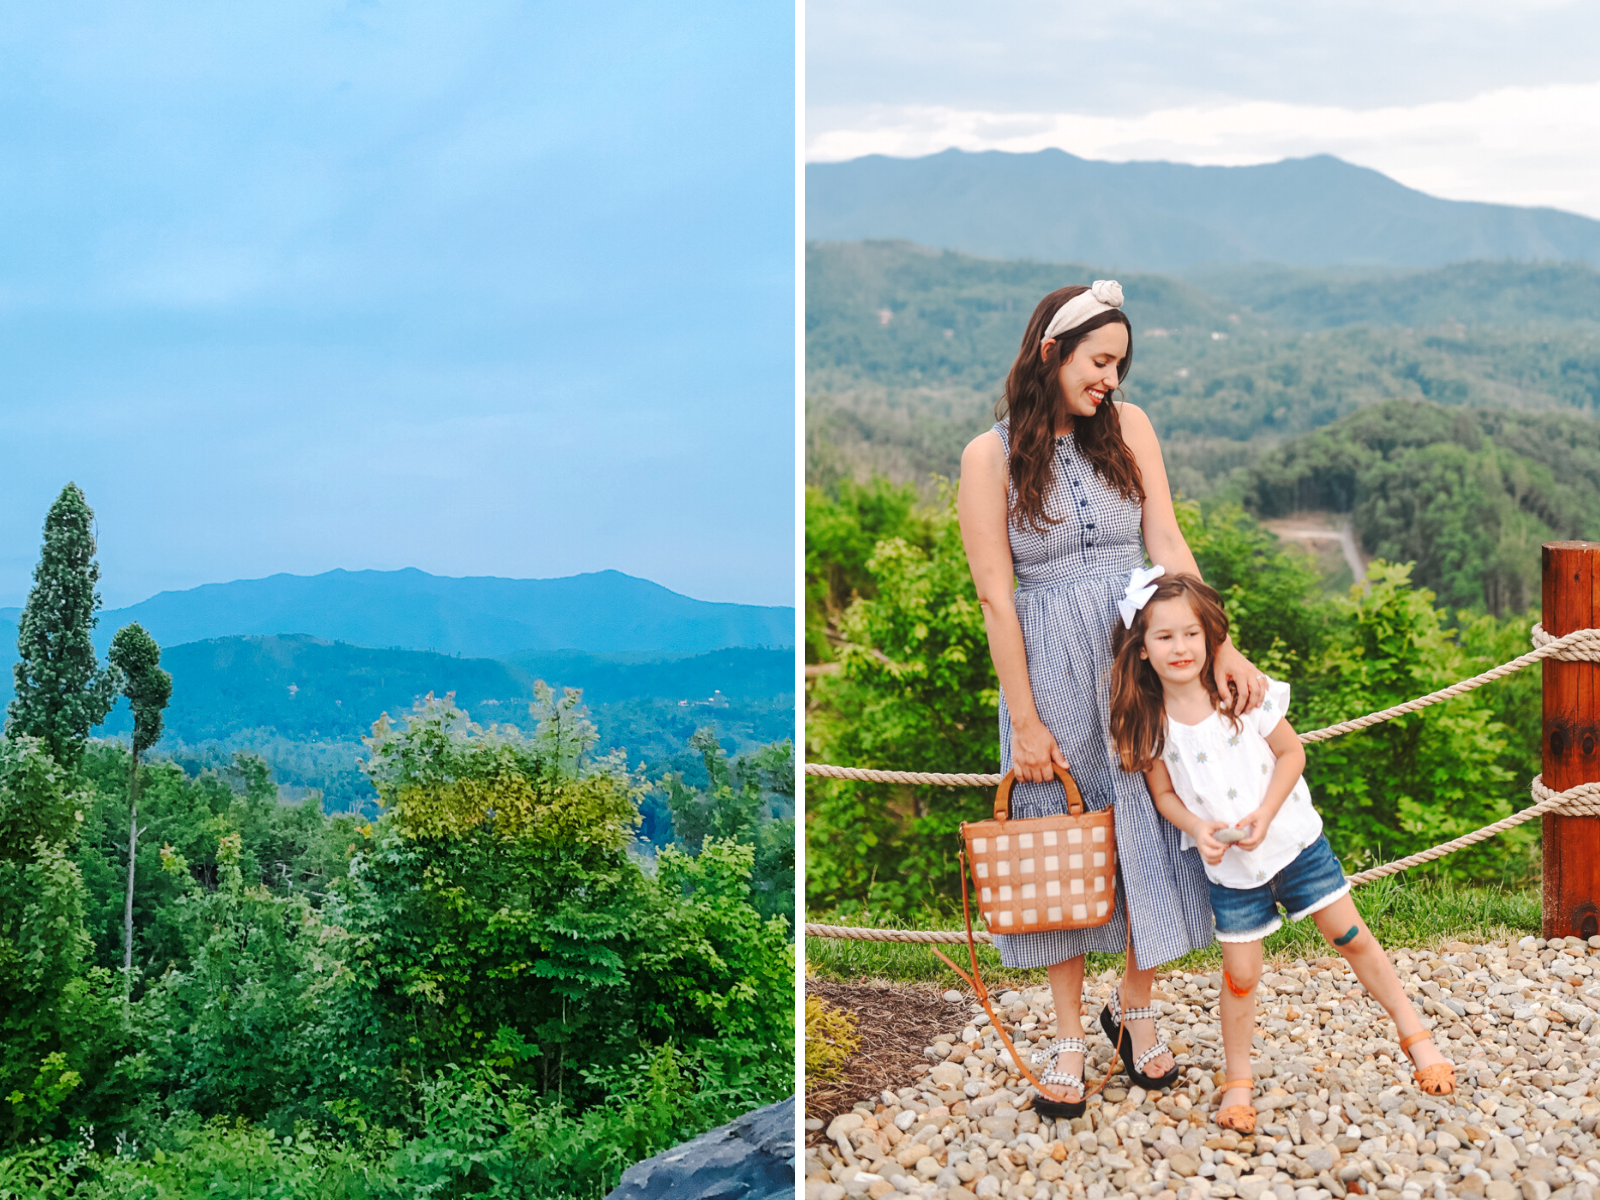 Westgate Smoky Mountain Resort reviewed by top US travel blogger, Lone Star Looking Glass